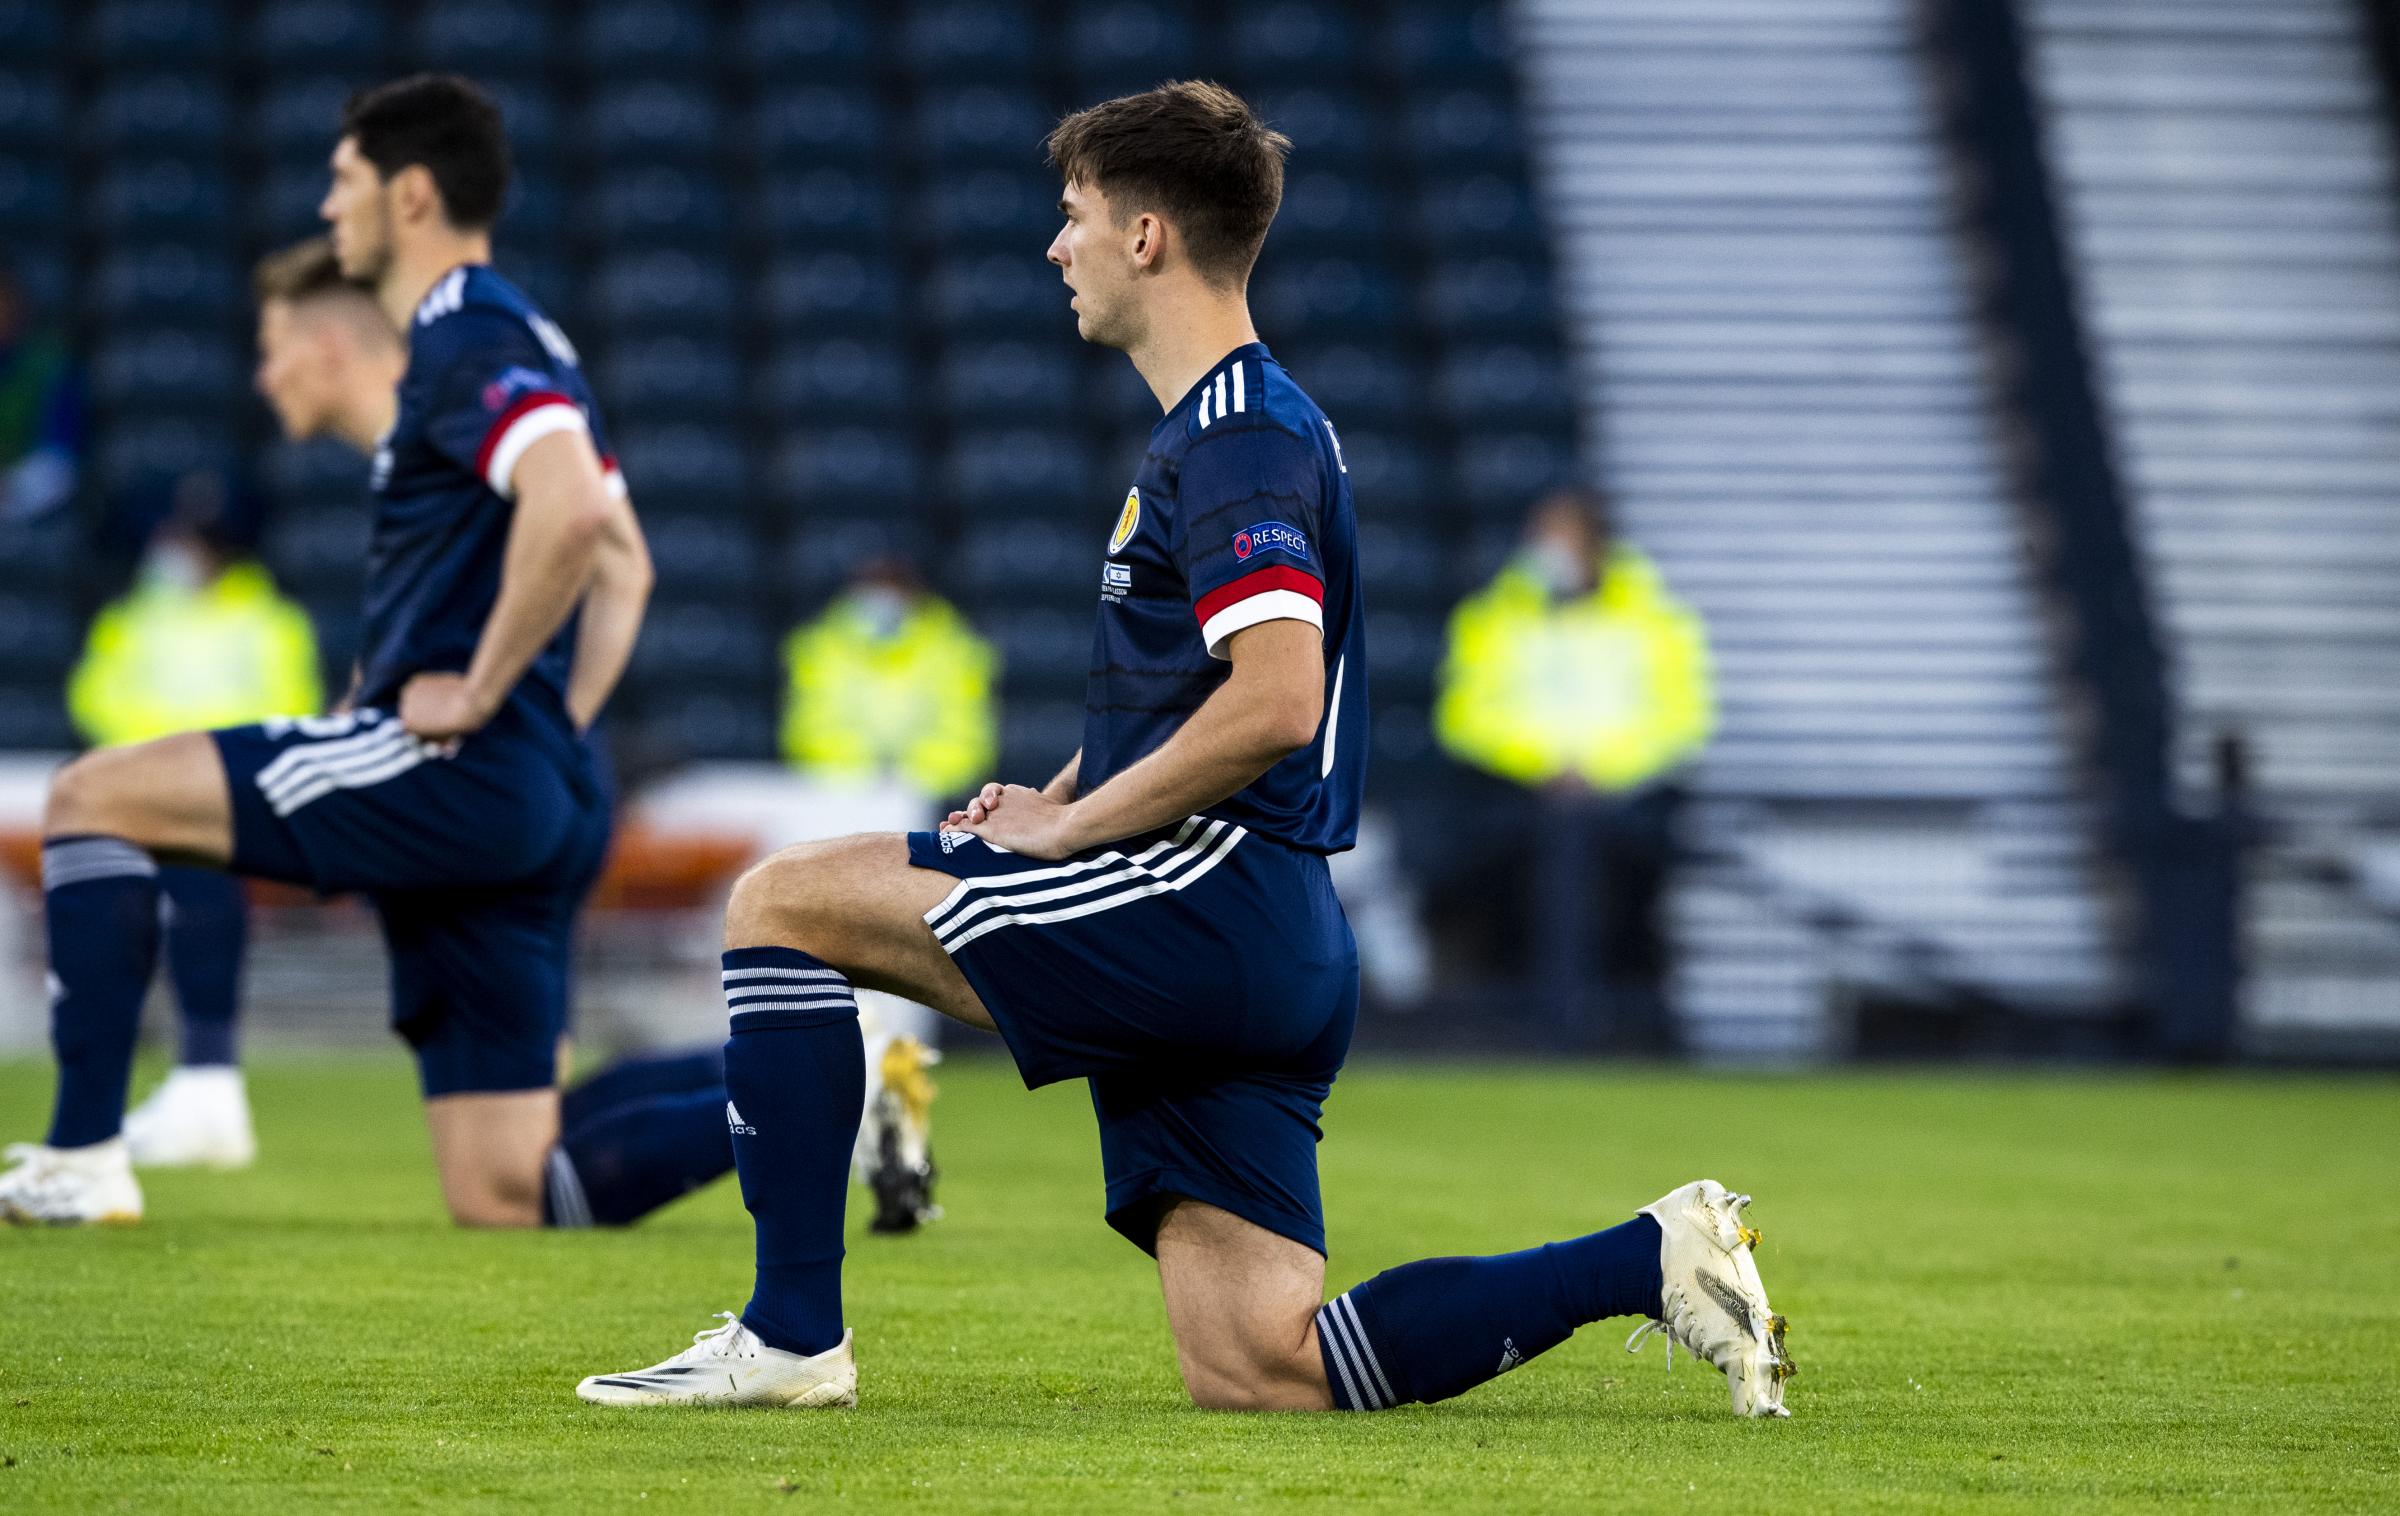 Scotland will take knee at Wembley against England in solidarity pledge